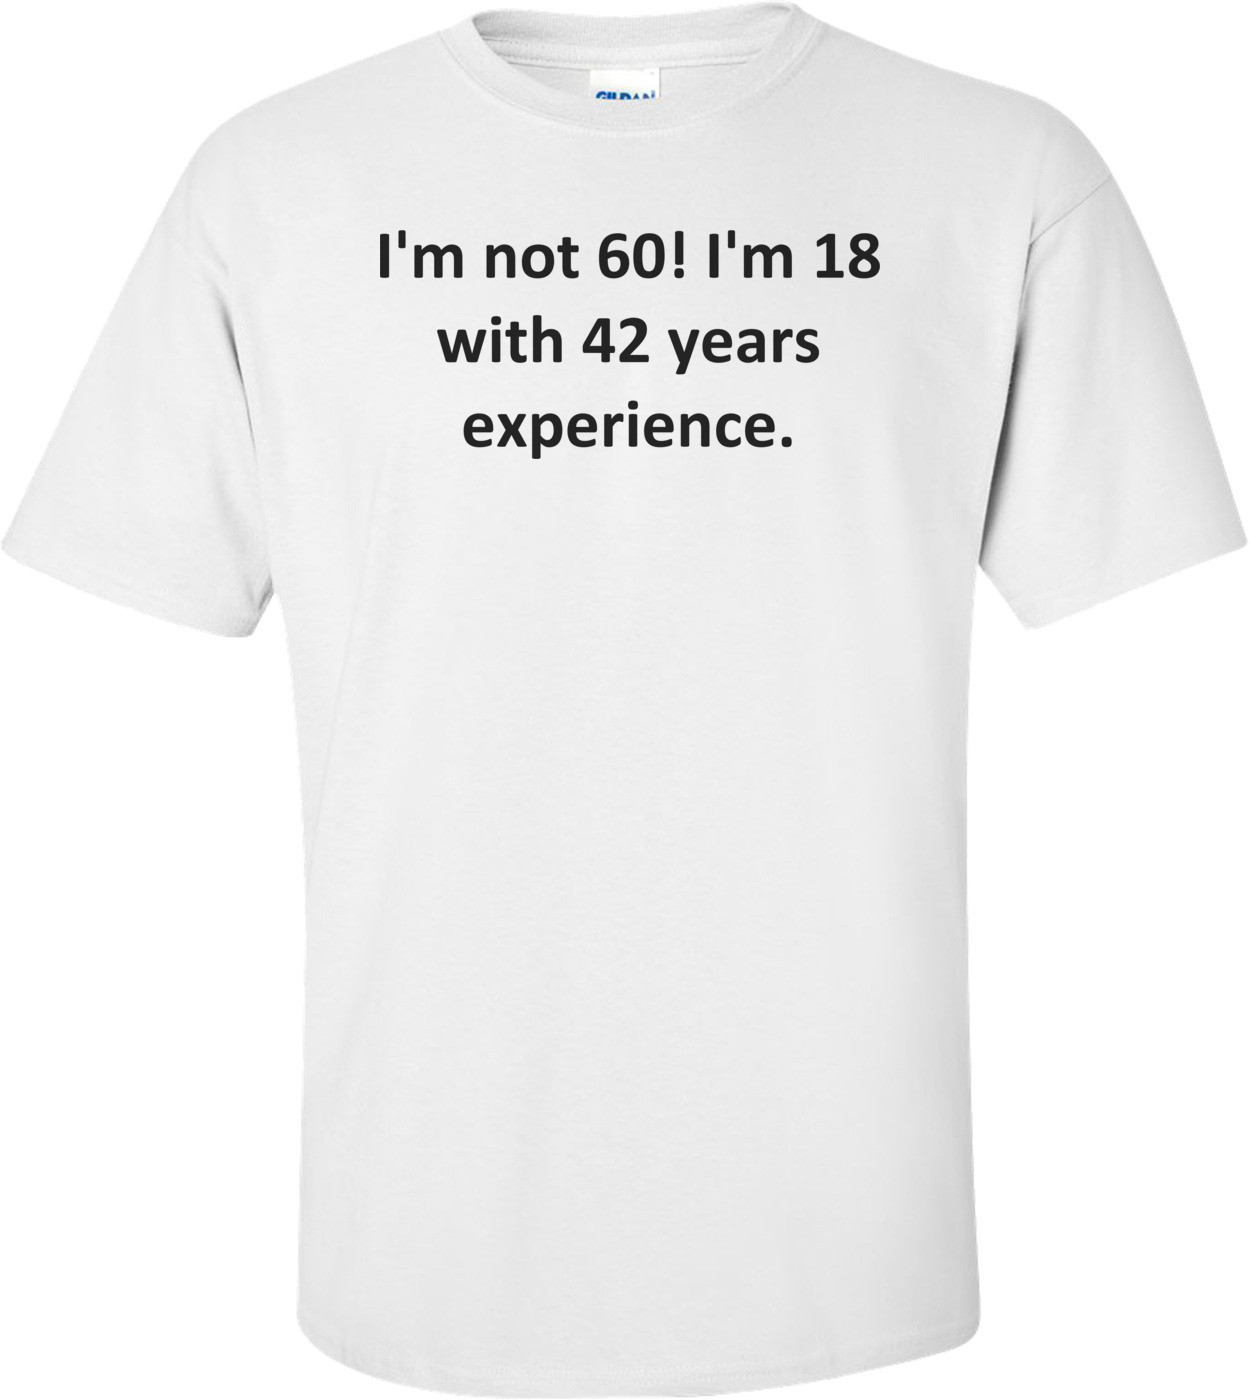 I'm not 60! I'm 18 with 42 years experience.